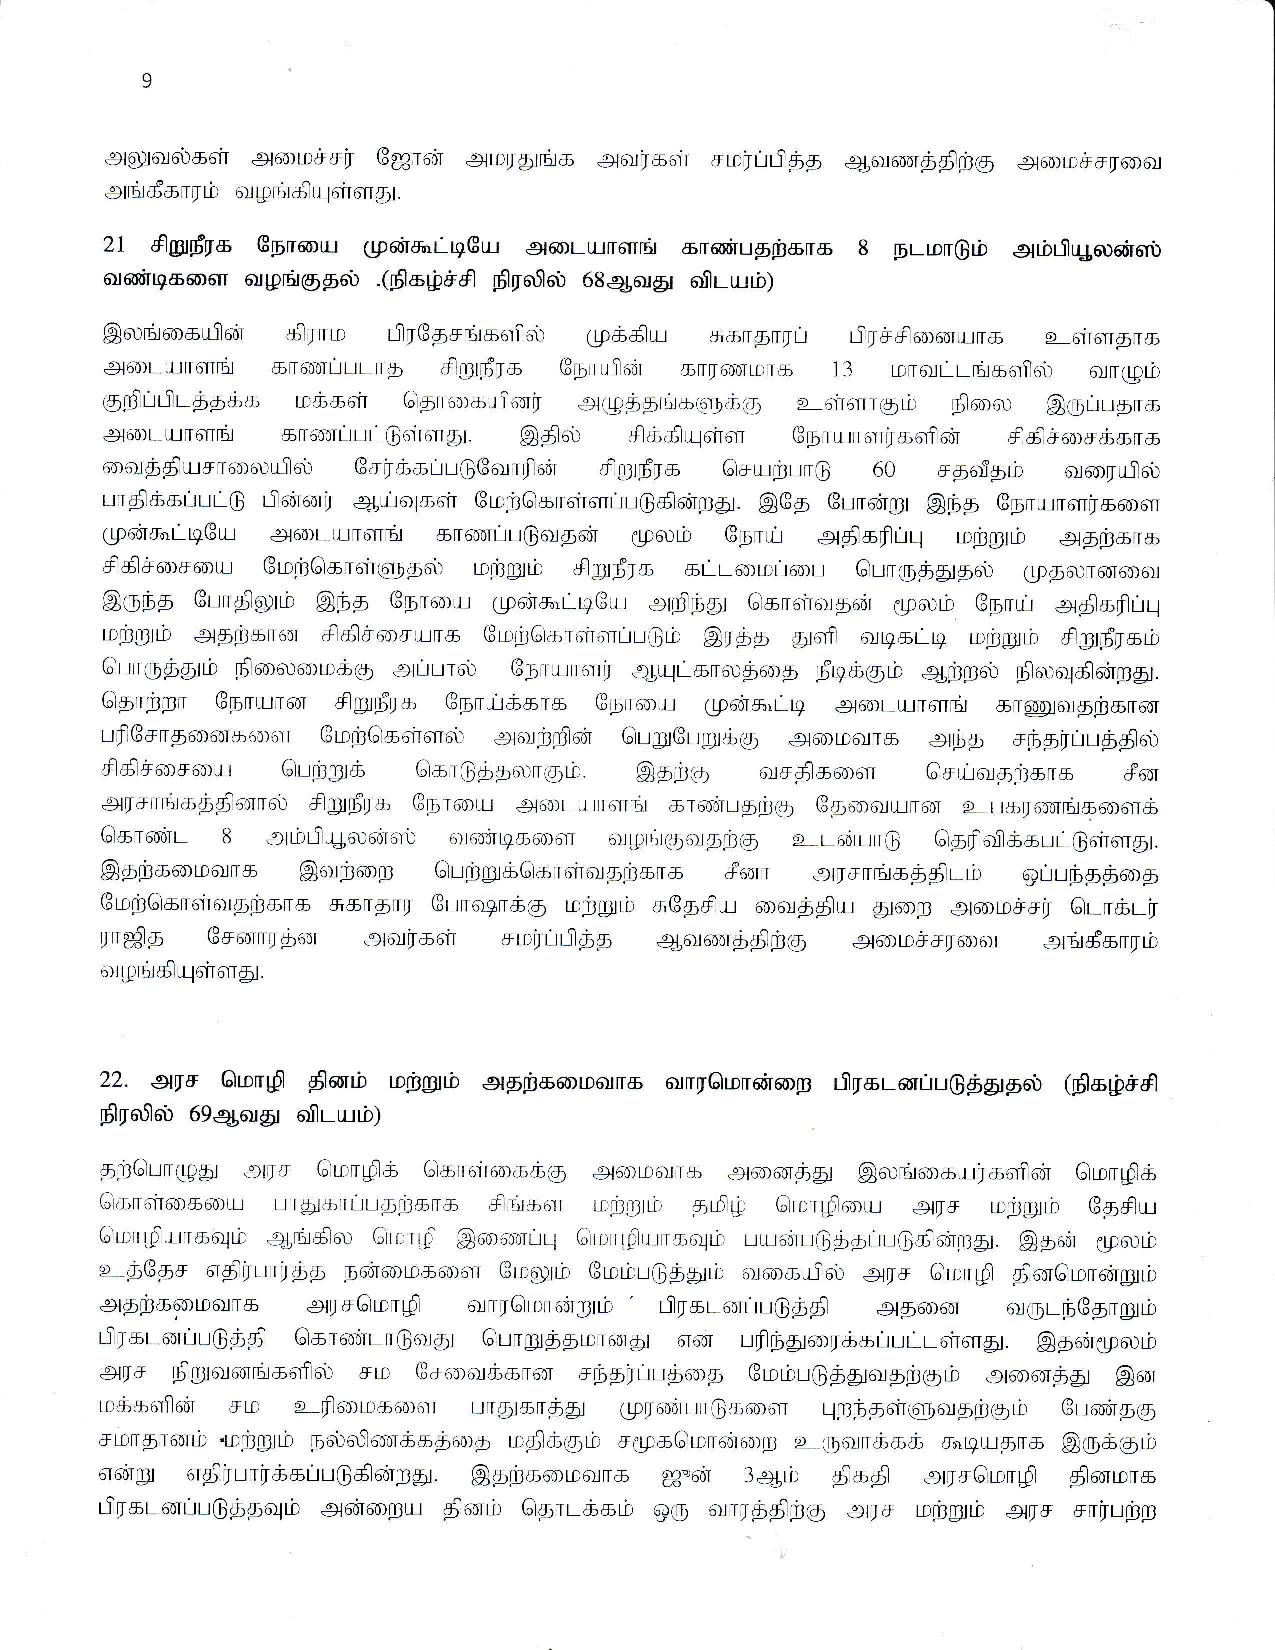 Cabinet Decision on 21.05.2019 Tamil page 010